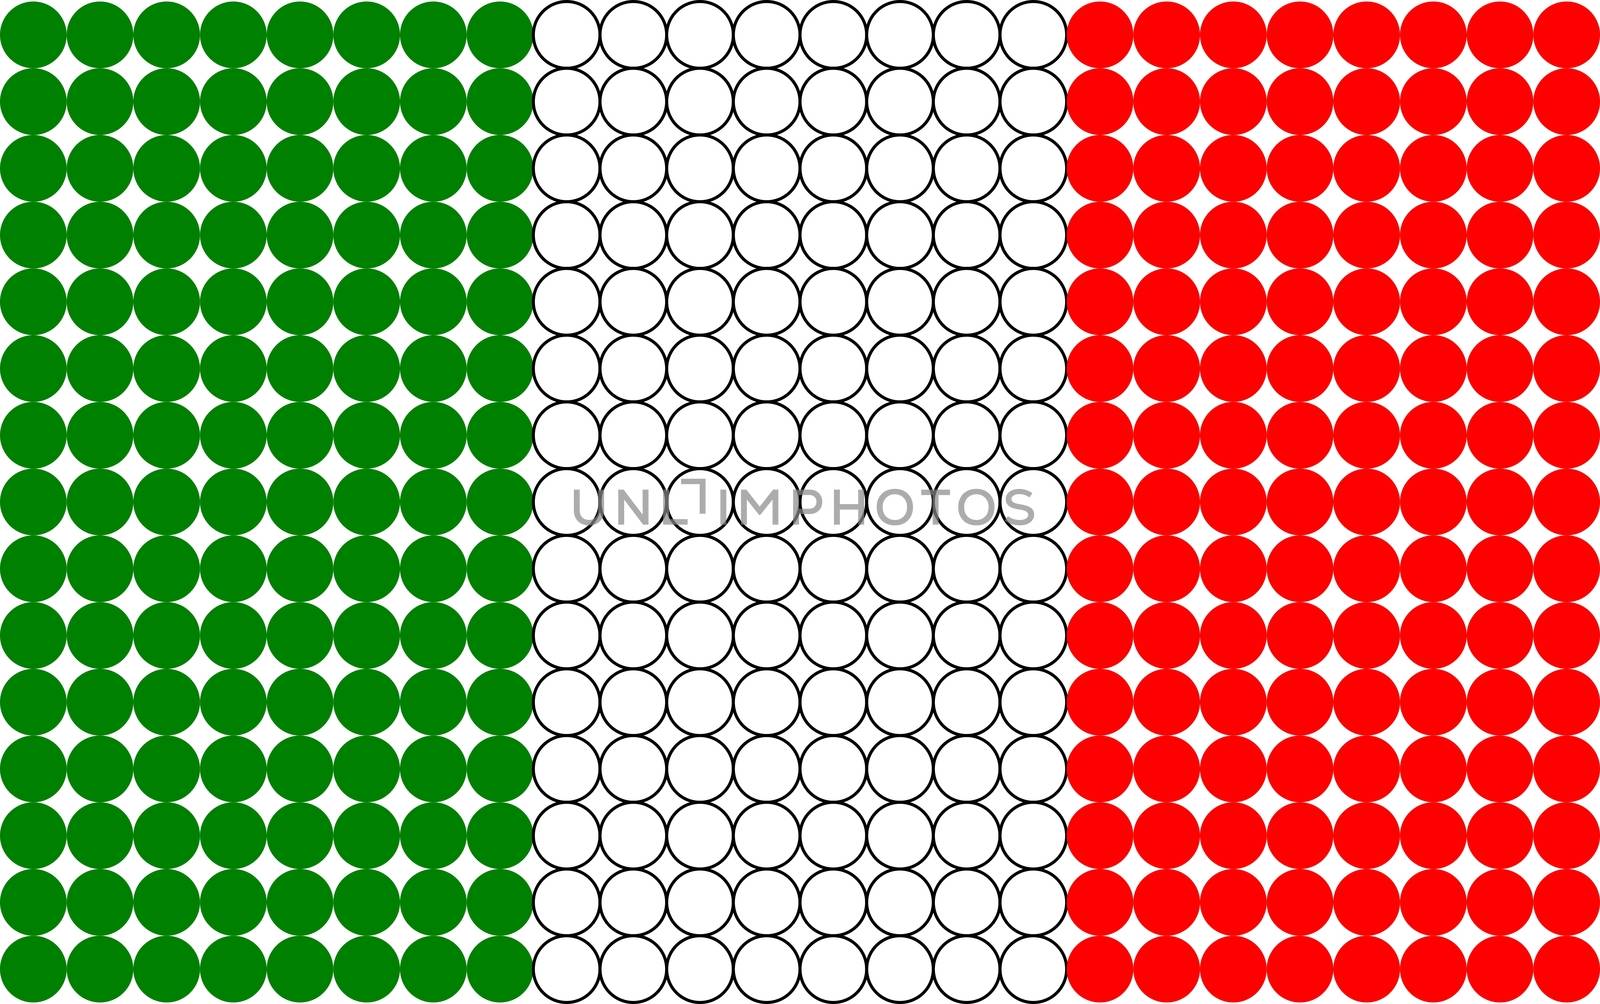 Abstract dotted Italian flag made from small dots.